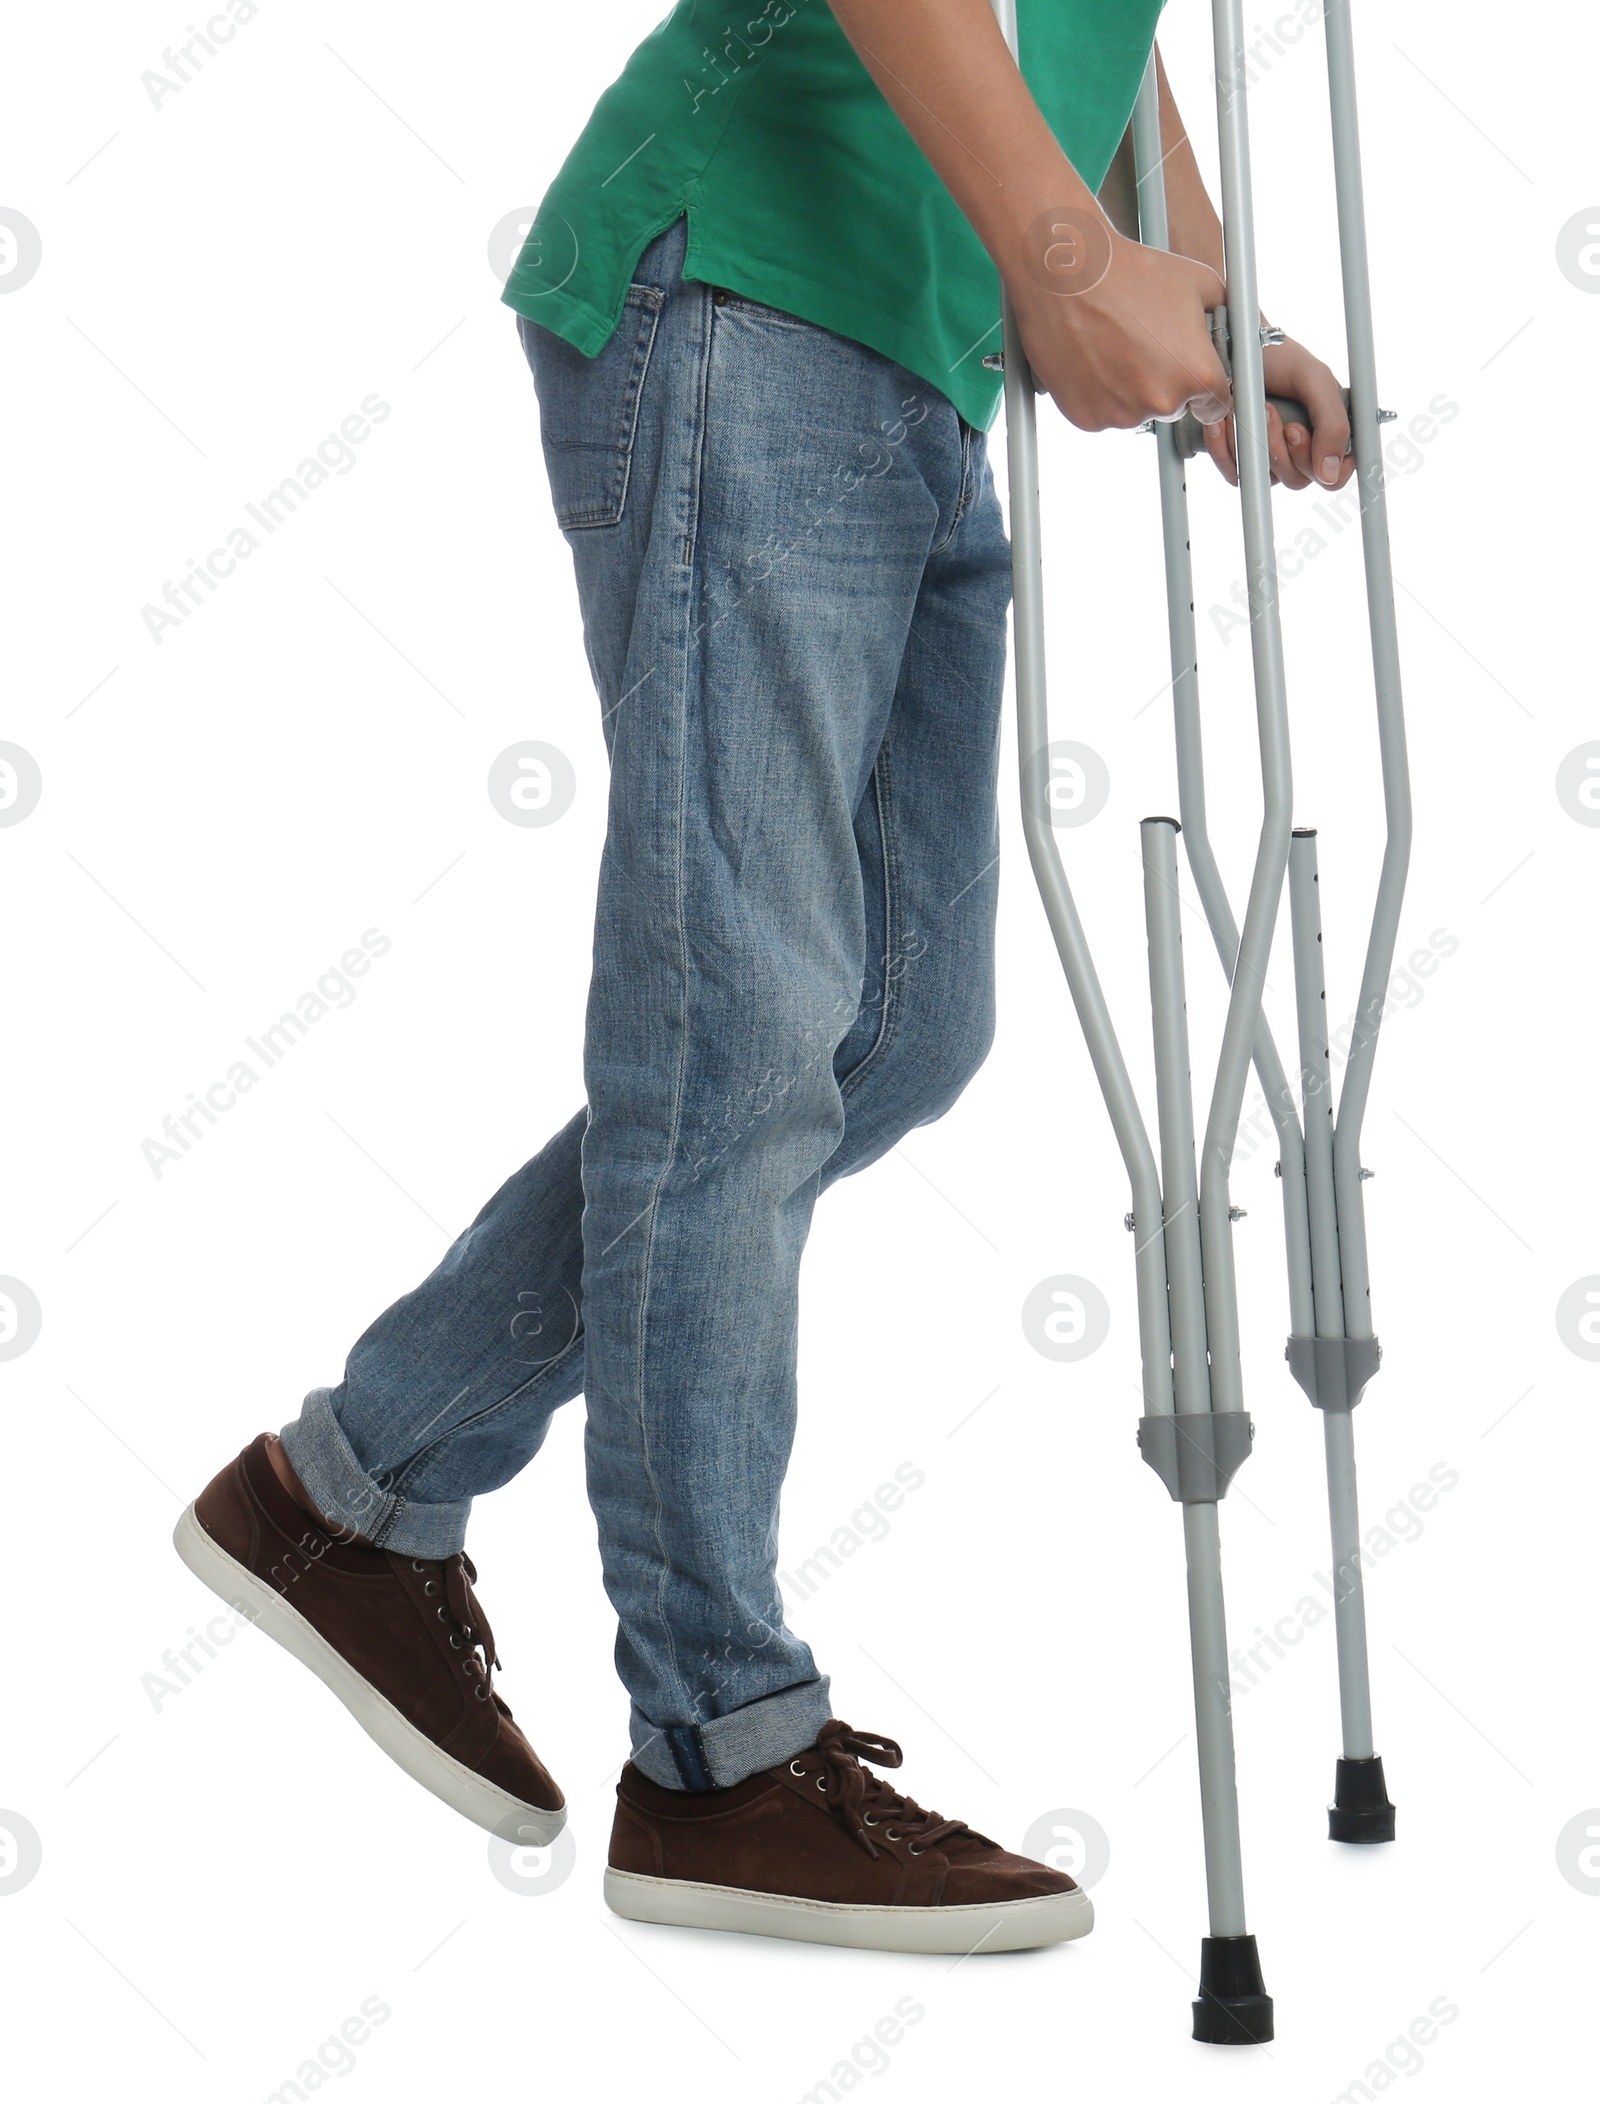 Photo of Man with injured leg using crutches on white background, closeup